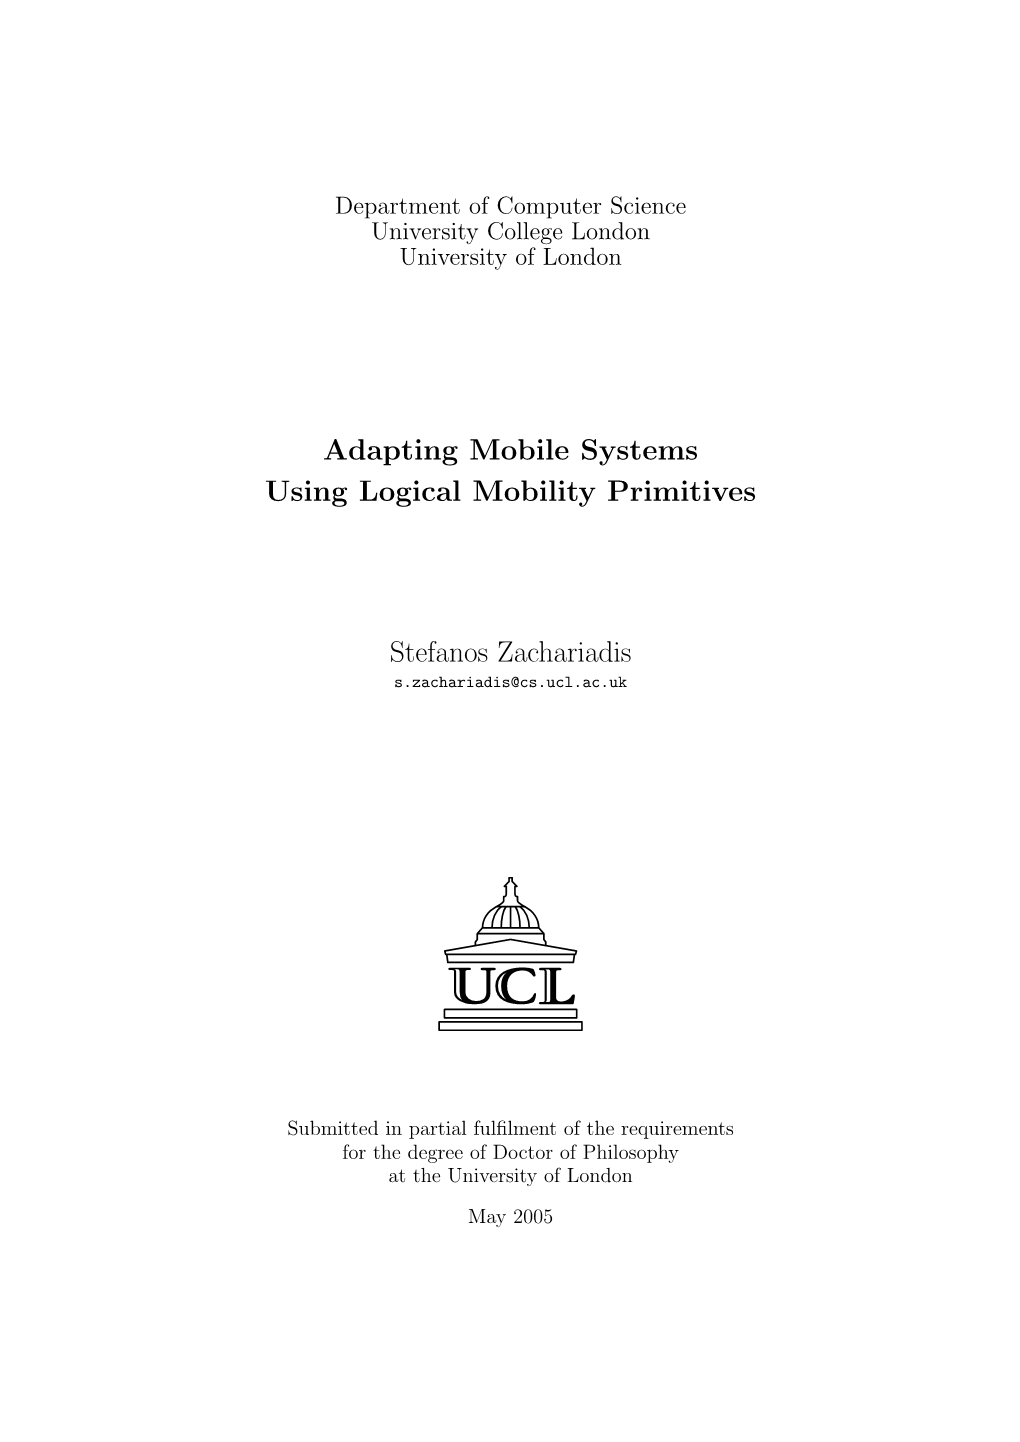 Adapting Mobile Systems Using Logical Mobility Primitives